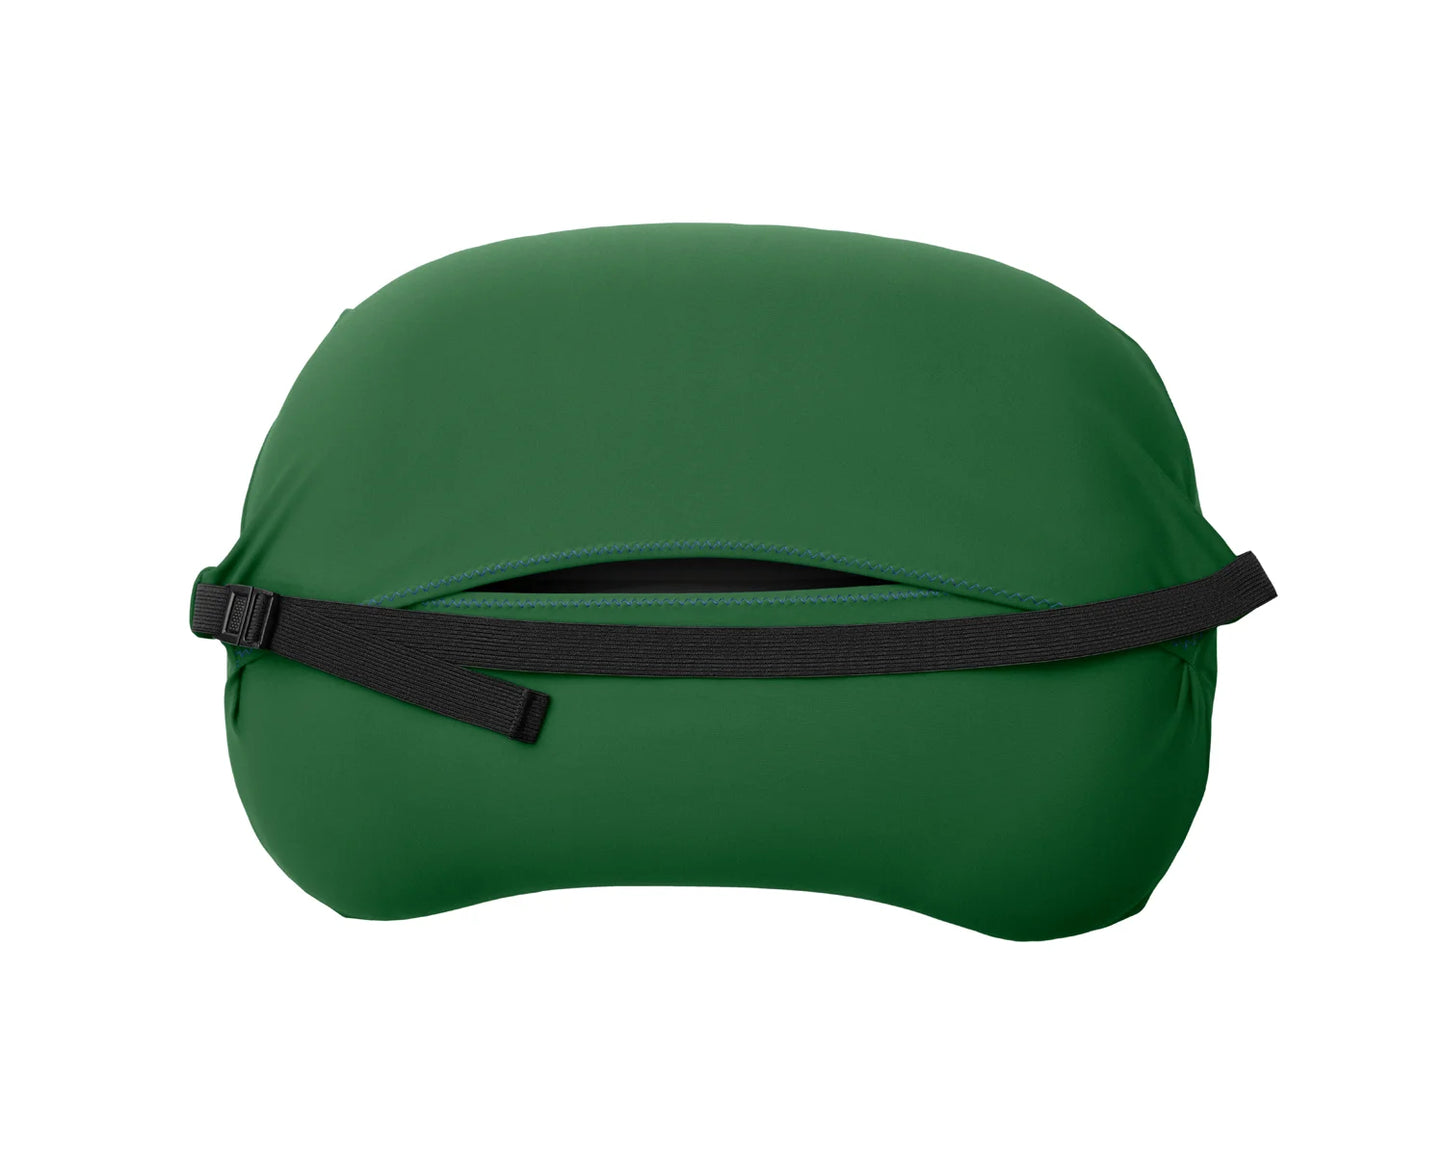 Trifold enclosure and strap of medium in green Pillow Strap to securely hold camp pillow to sleeping pad.